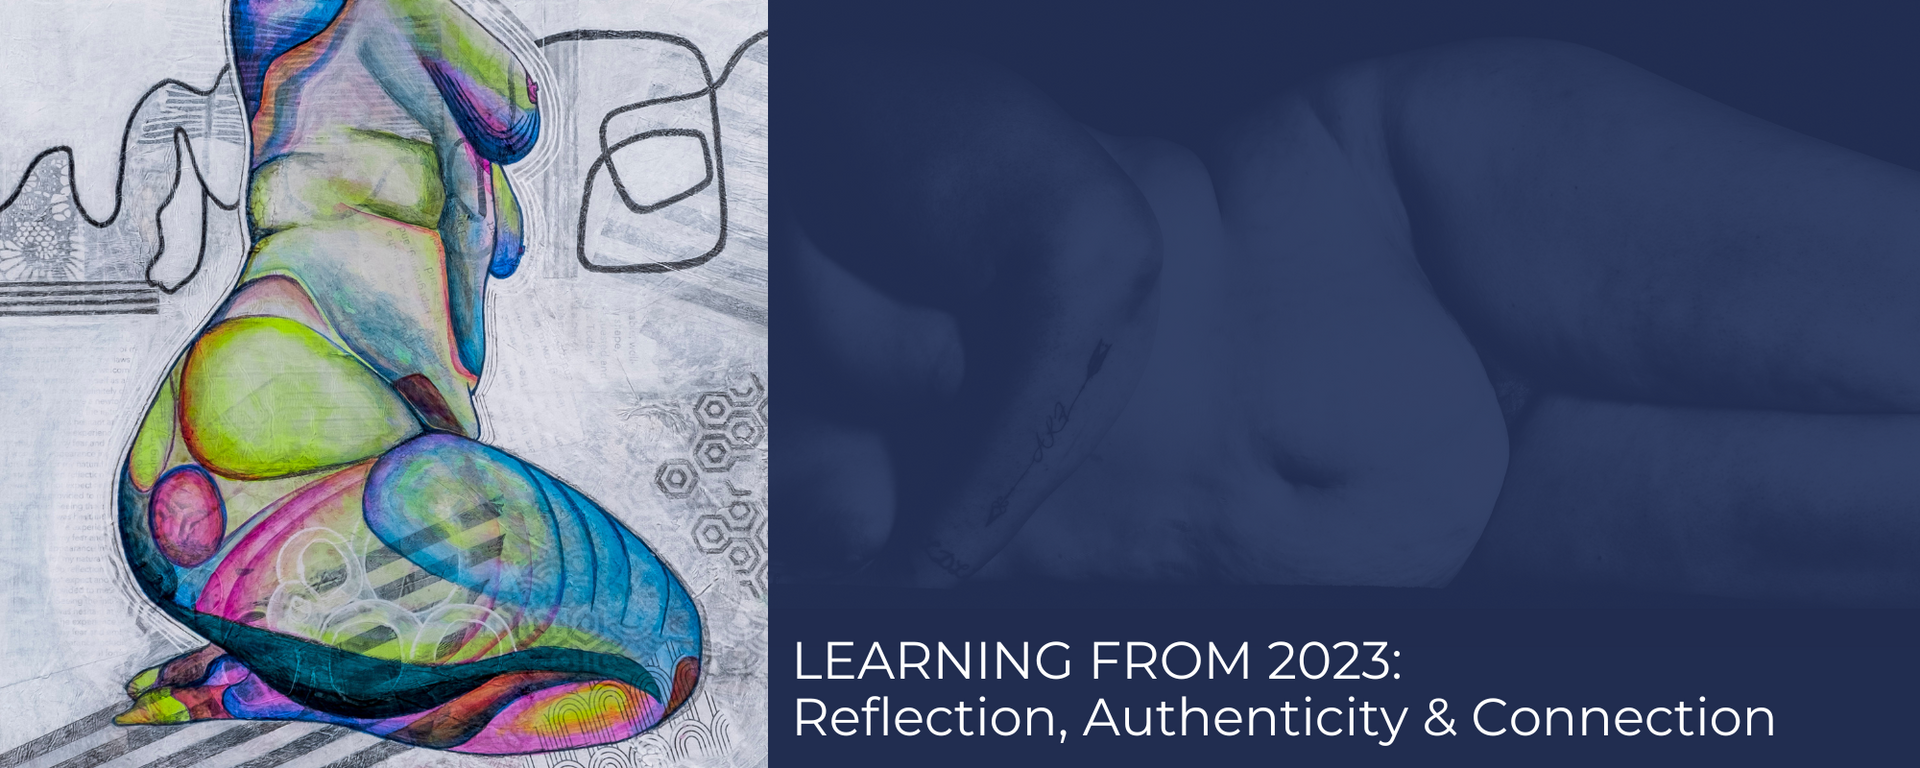 LEARNING FROM 2023: Refection, Authenticity & Connection